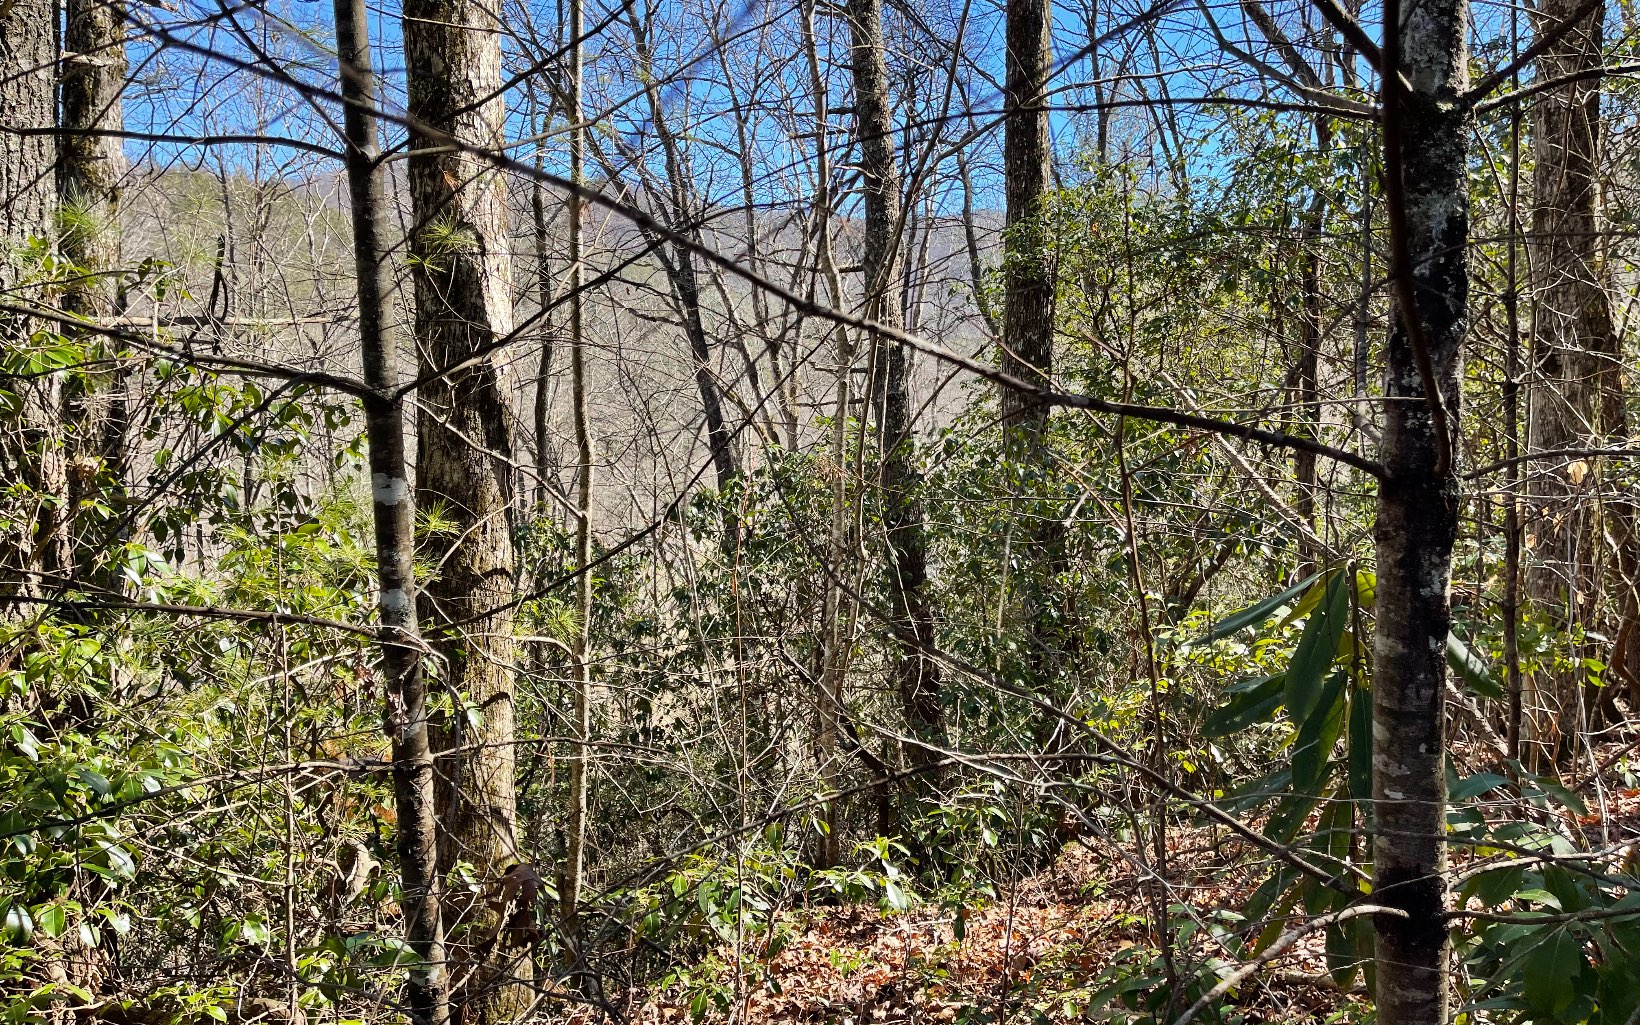 COME BUILD YOUR PRIVATE NORTH GEORGIA MOUNTAIN GETAWAY IN A GATED SUBDIVISION BETWEEN HIAWASSEE & HELEN GA!! Wooded Lot in the Mountains of North Georgia. The community offers gated entrance, ponds, Creekside fun and fishing, privacy. Short walk to Appalachian trails, in addition a short ride to Brasstown Bald.